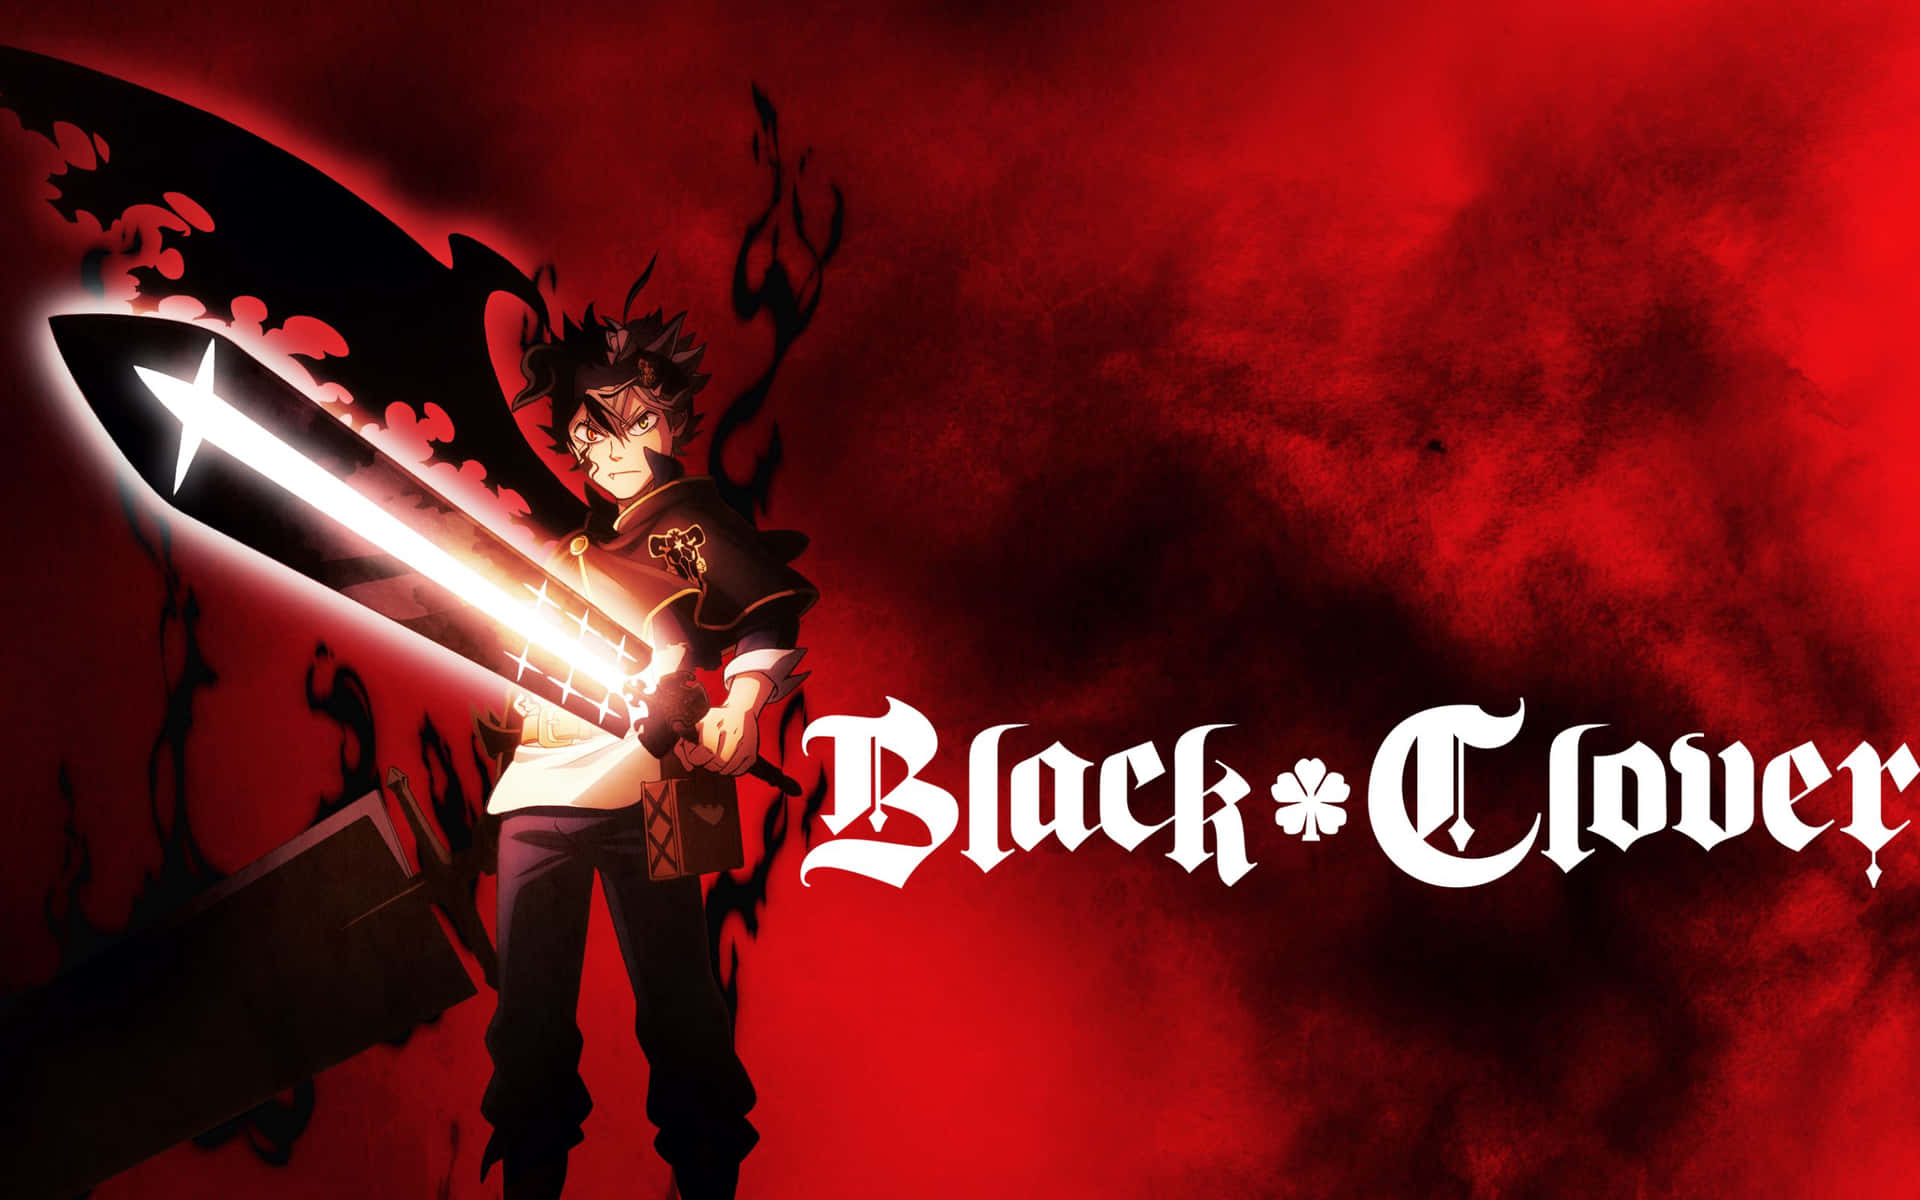 Made this Asta wallpaper for the final black clover episode    rBlackClover